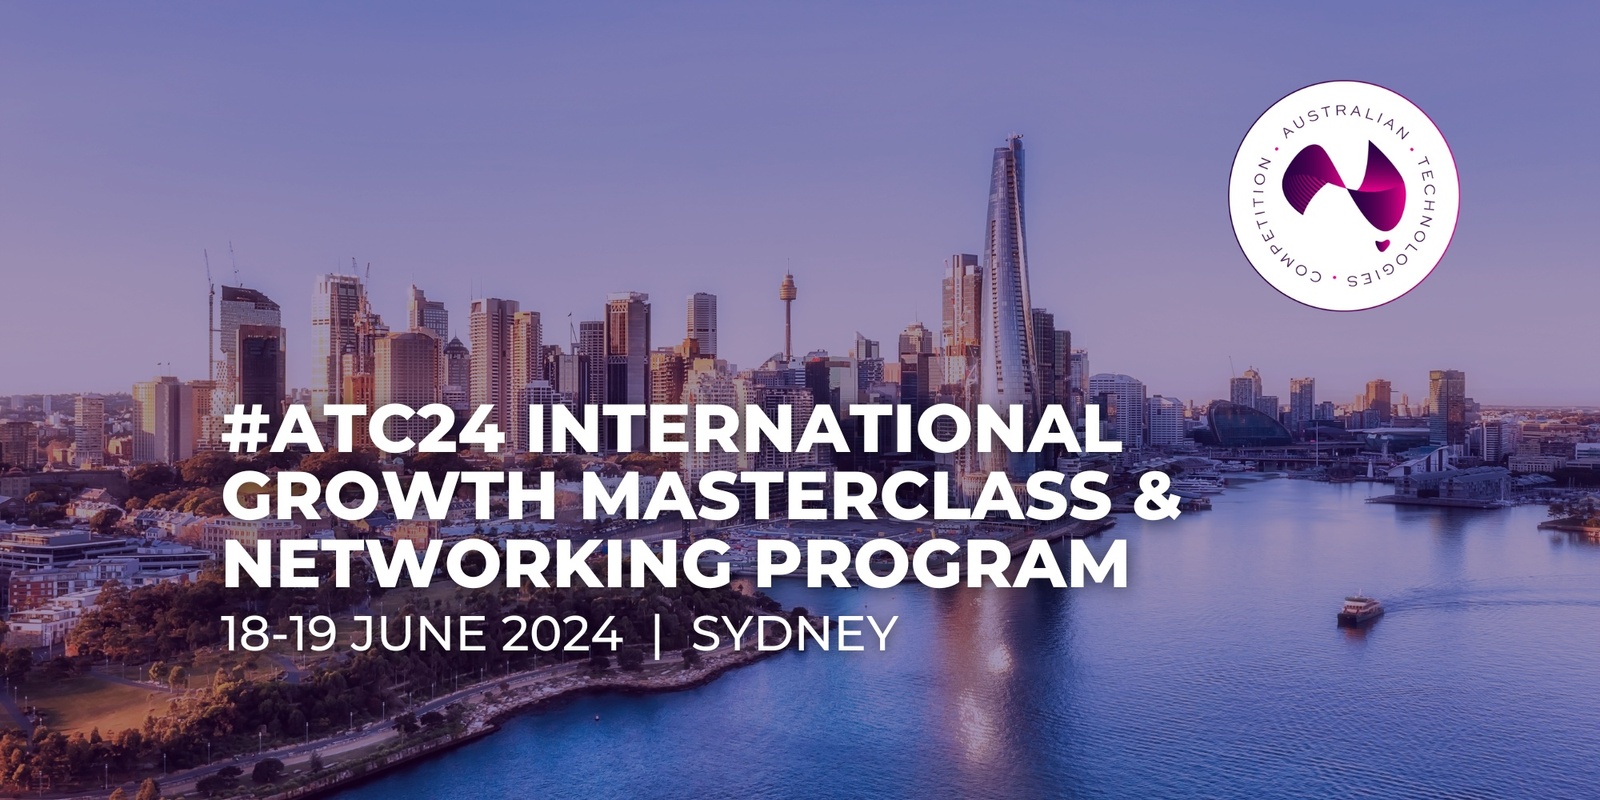 Banner image for #ATC24 2-Day International Growth Masterclass